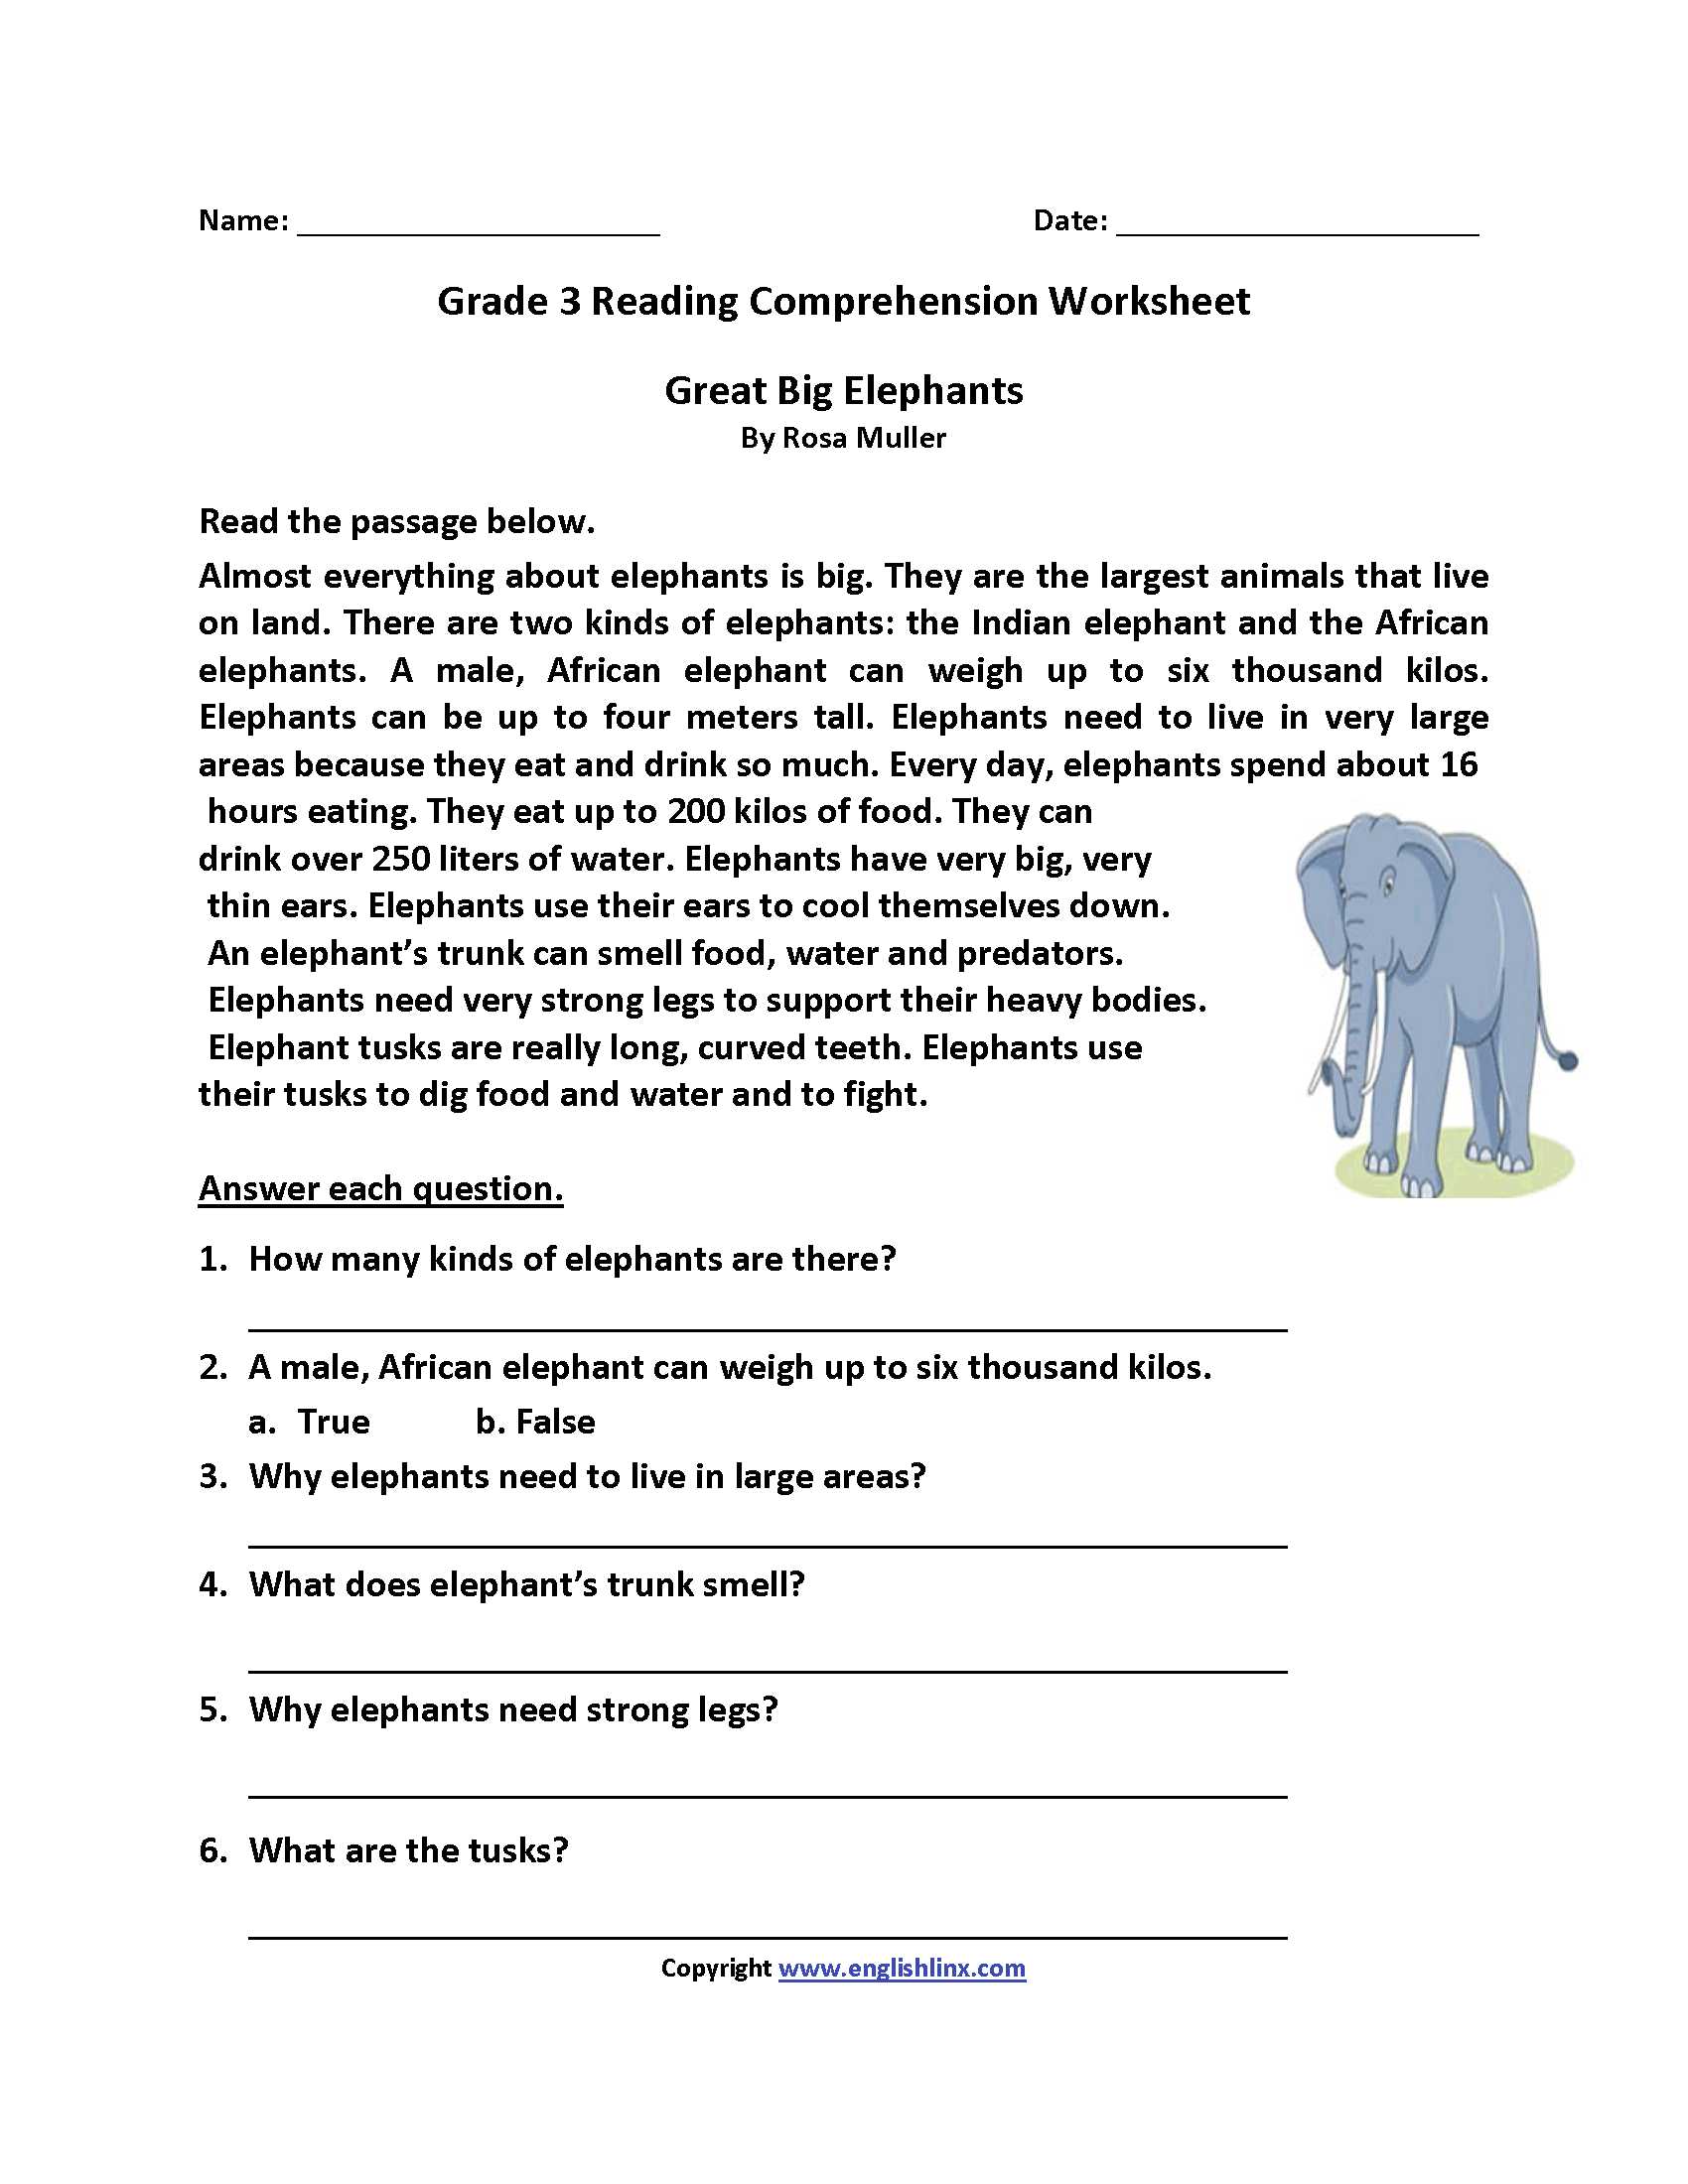 Comprehension Worksheets for Grade 2 and Math Free Reading Worksheets for 3rd Grade Mon Core Activities